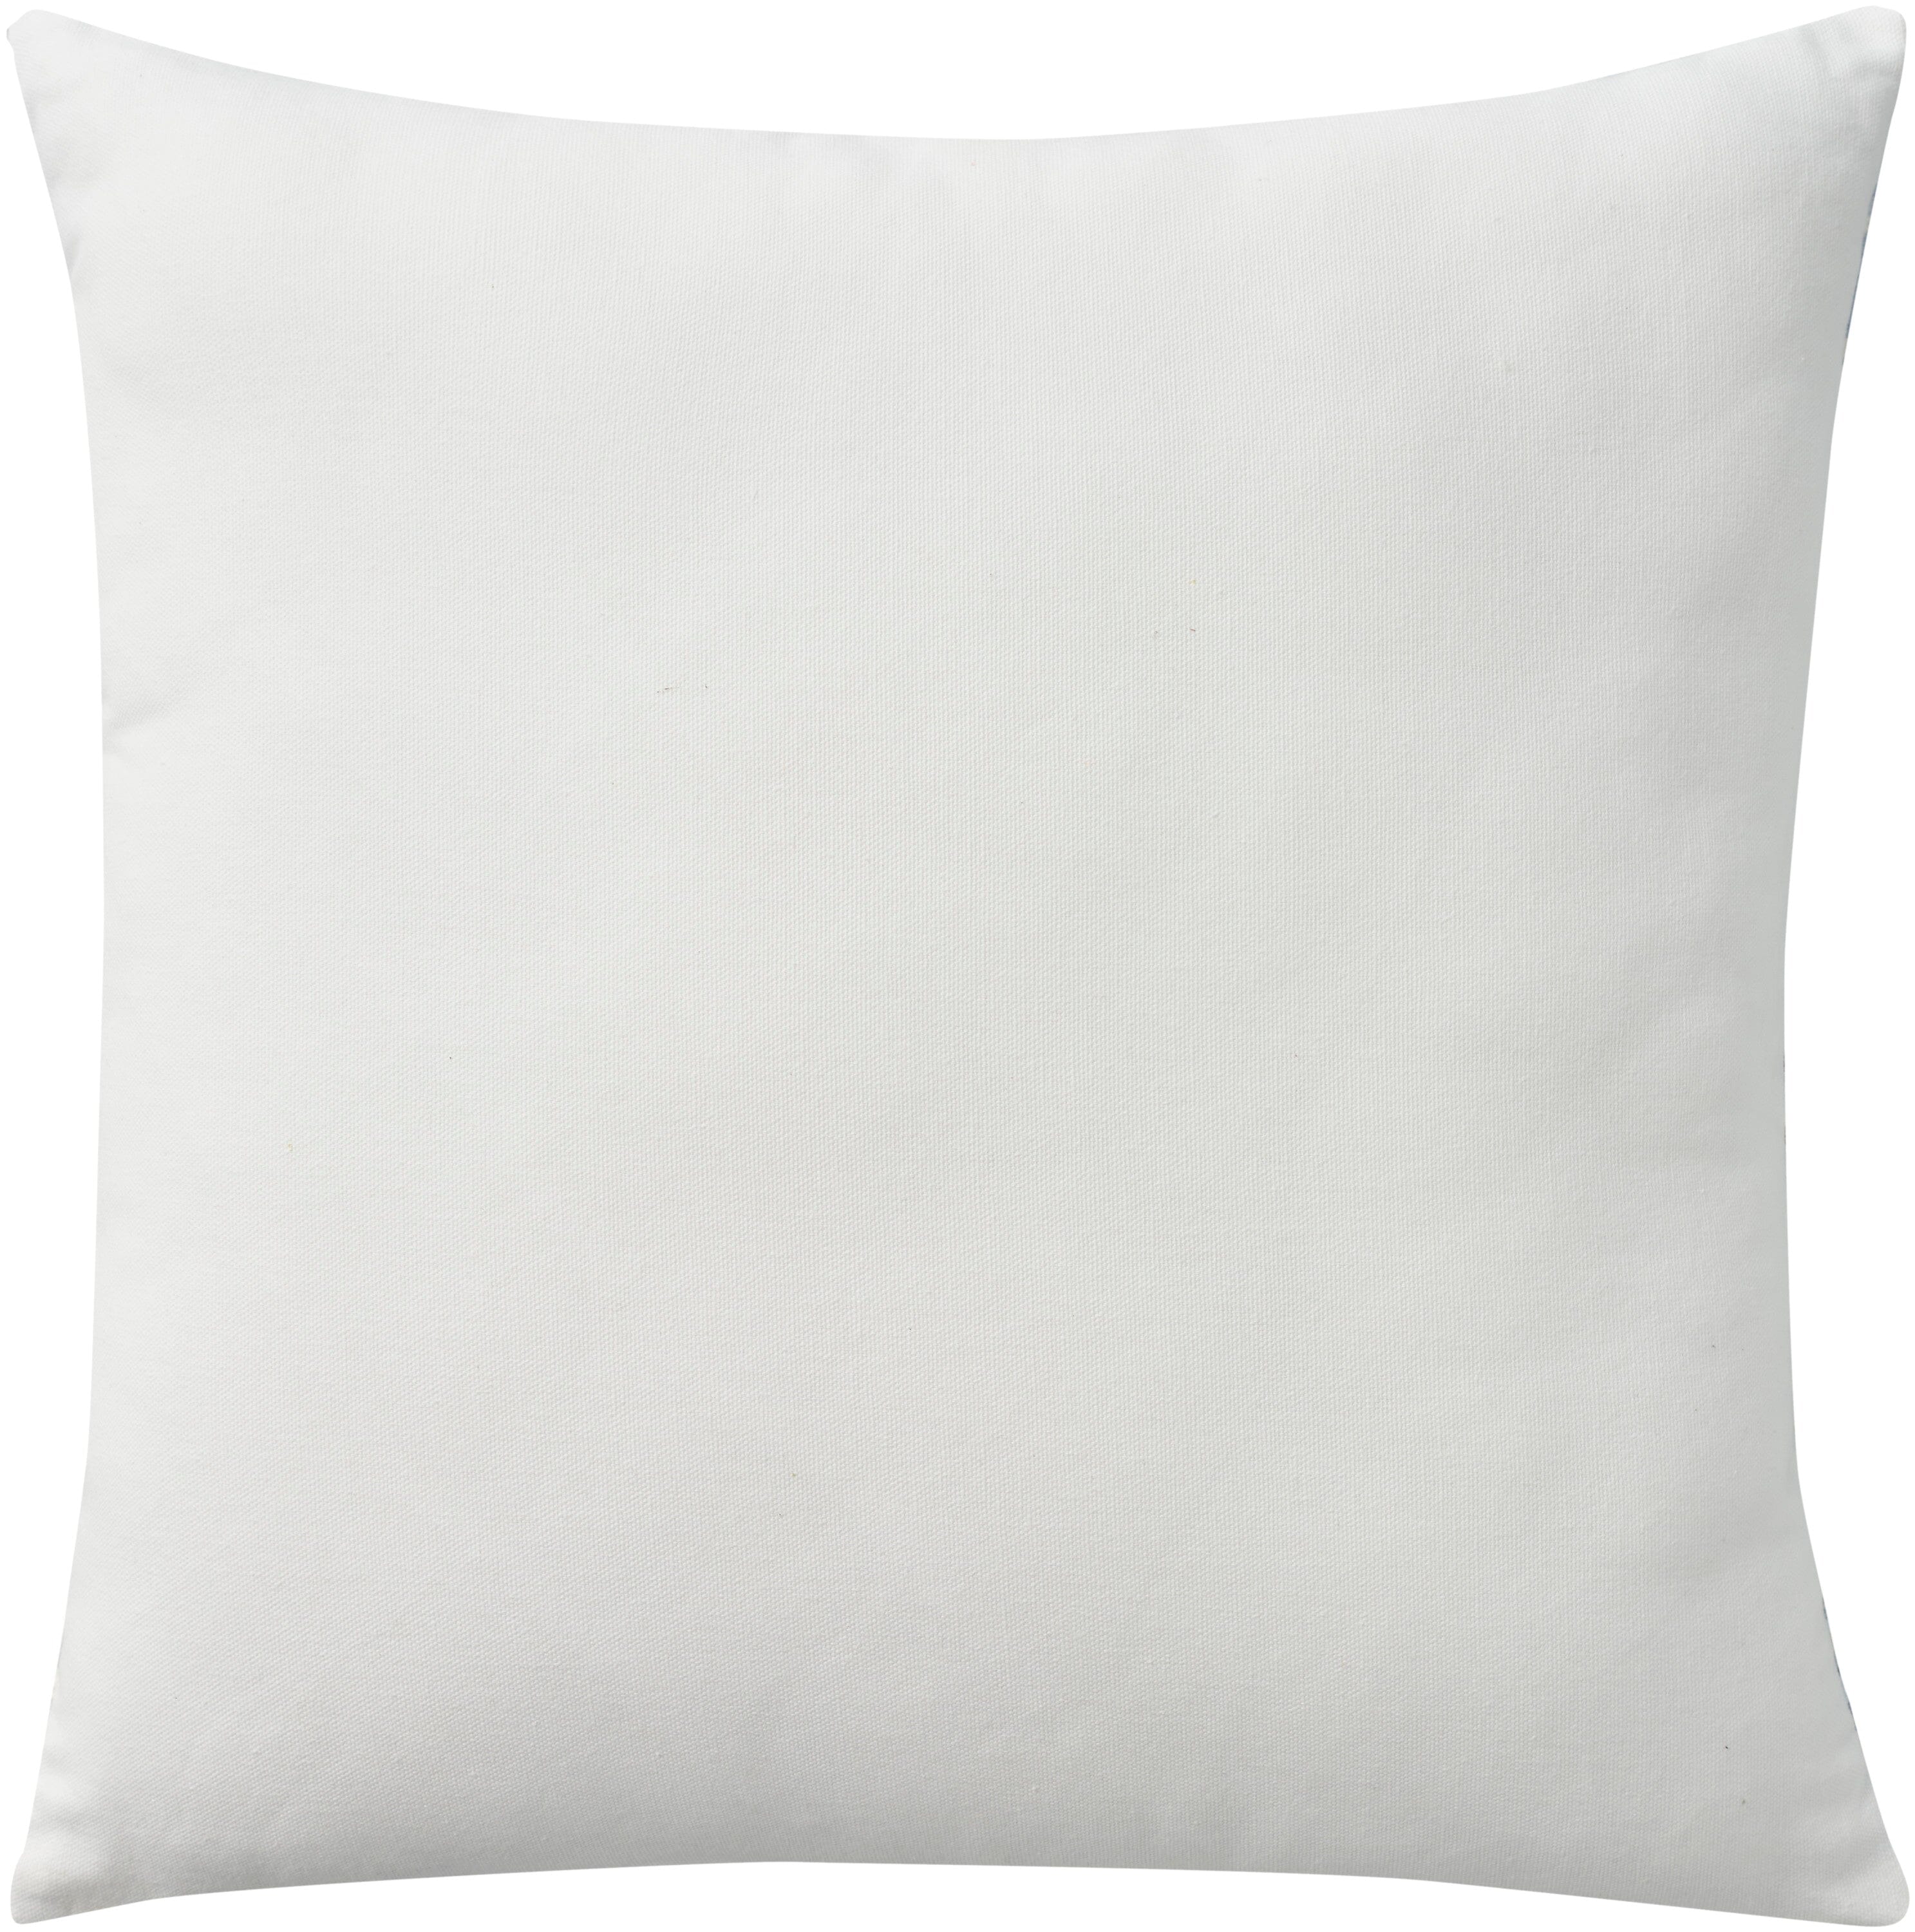 Mina Victory Cover Sea Set Free 18" x 18" White Indoor Pillow Covers Mina Victory